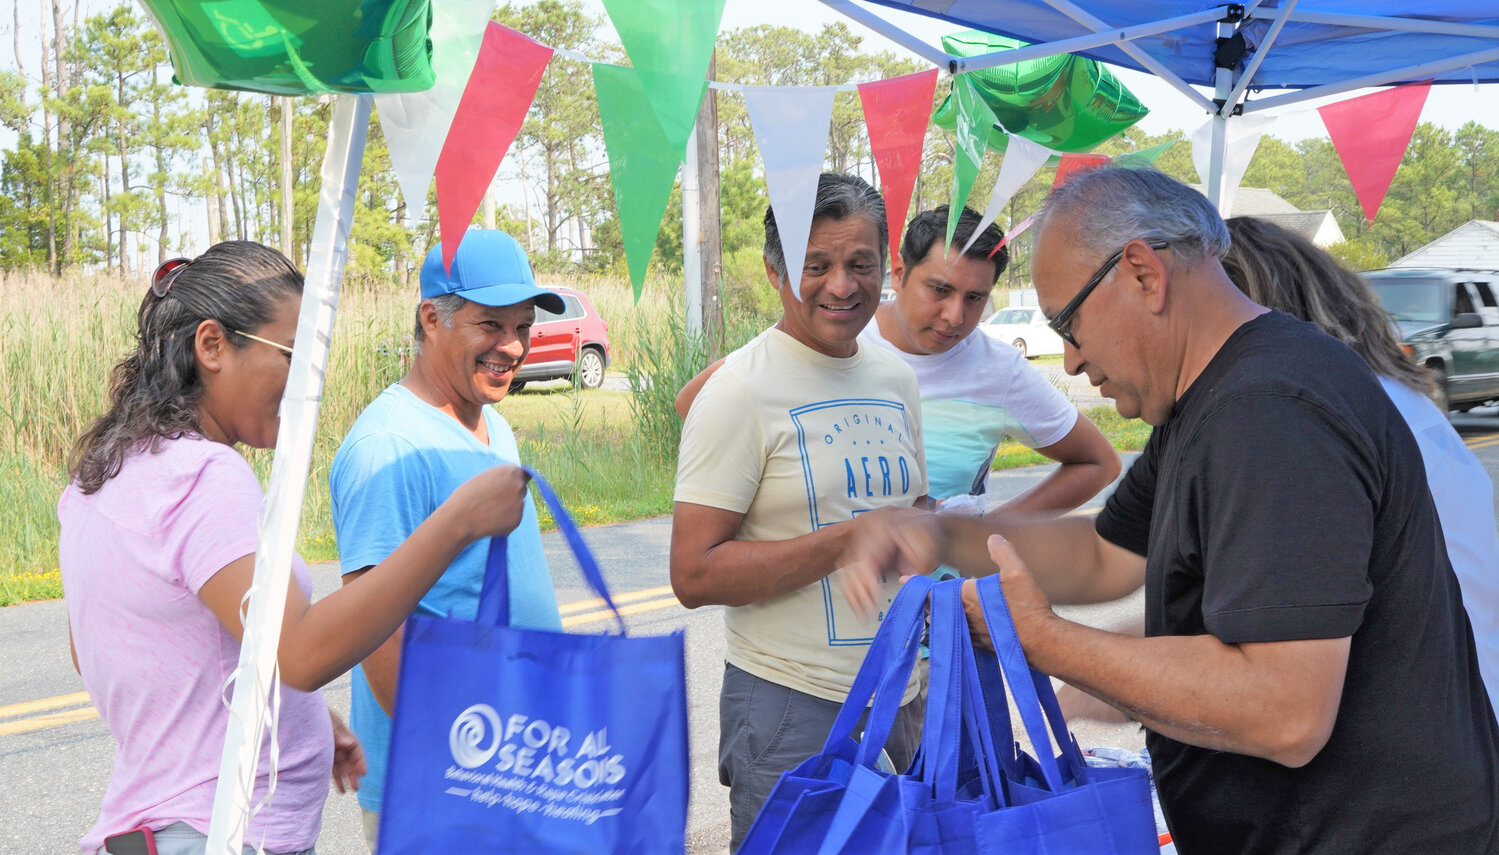 Alberto Ardaya, Interpreting Services supervisor, distributed For All Seasons resource bags.